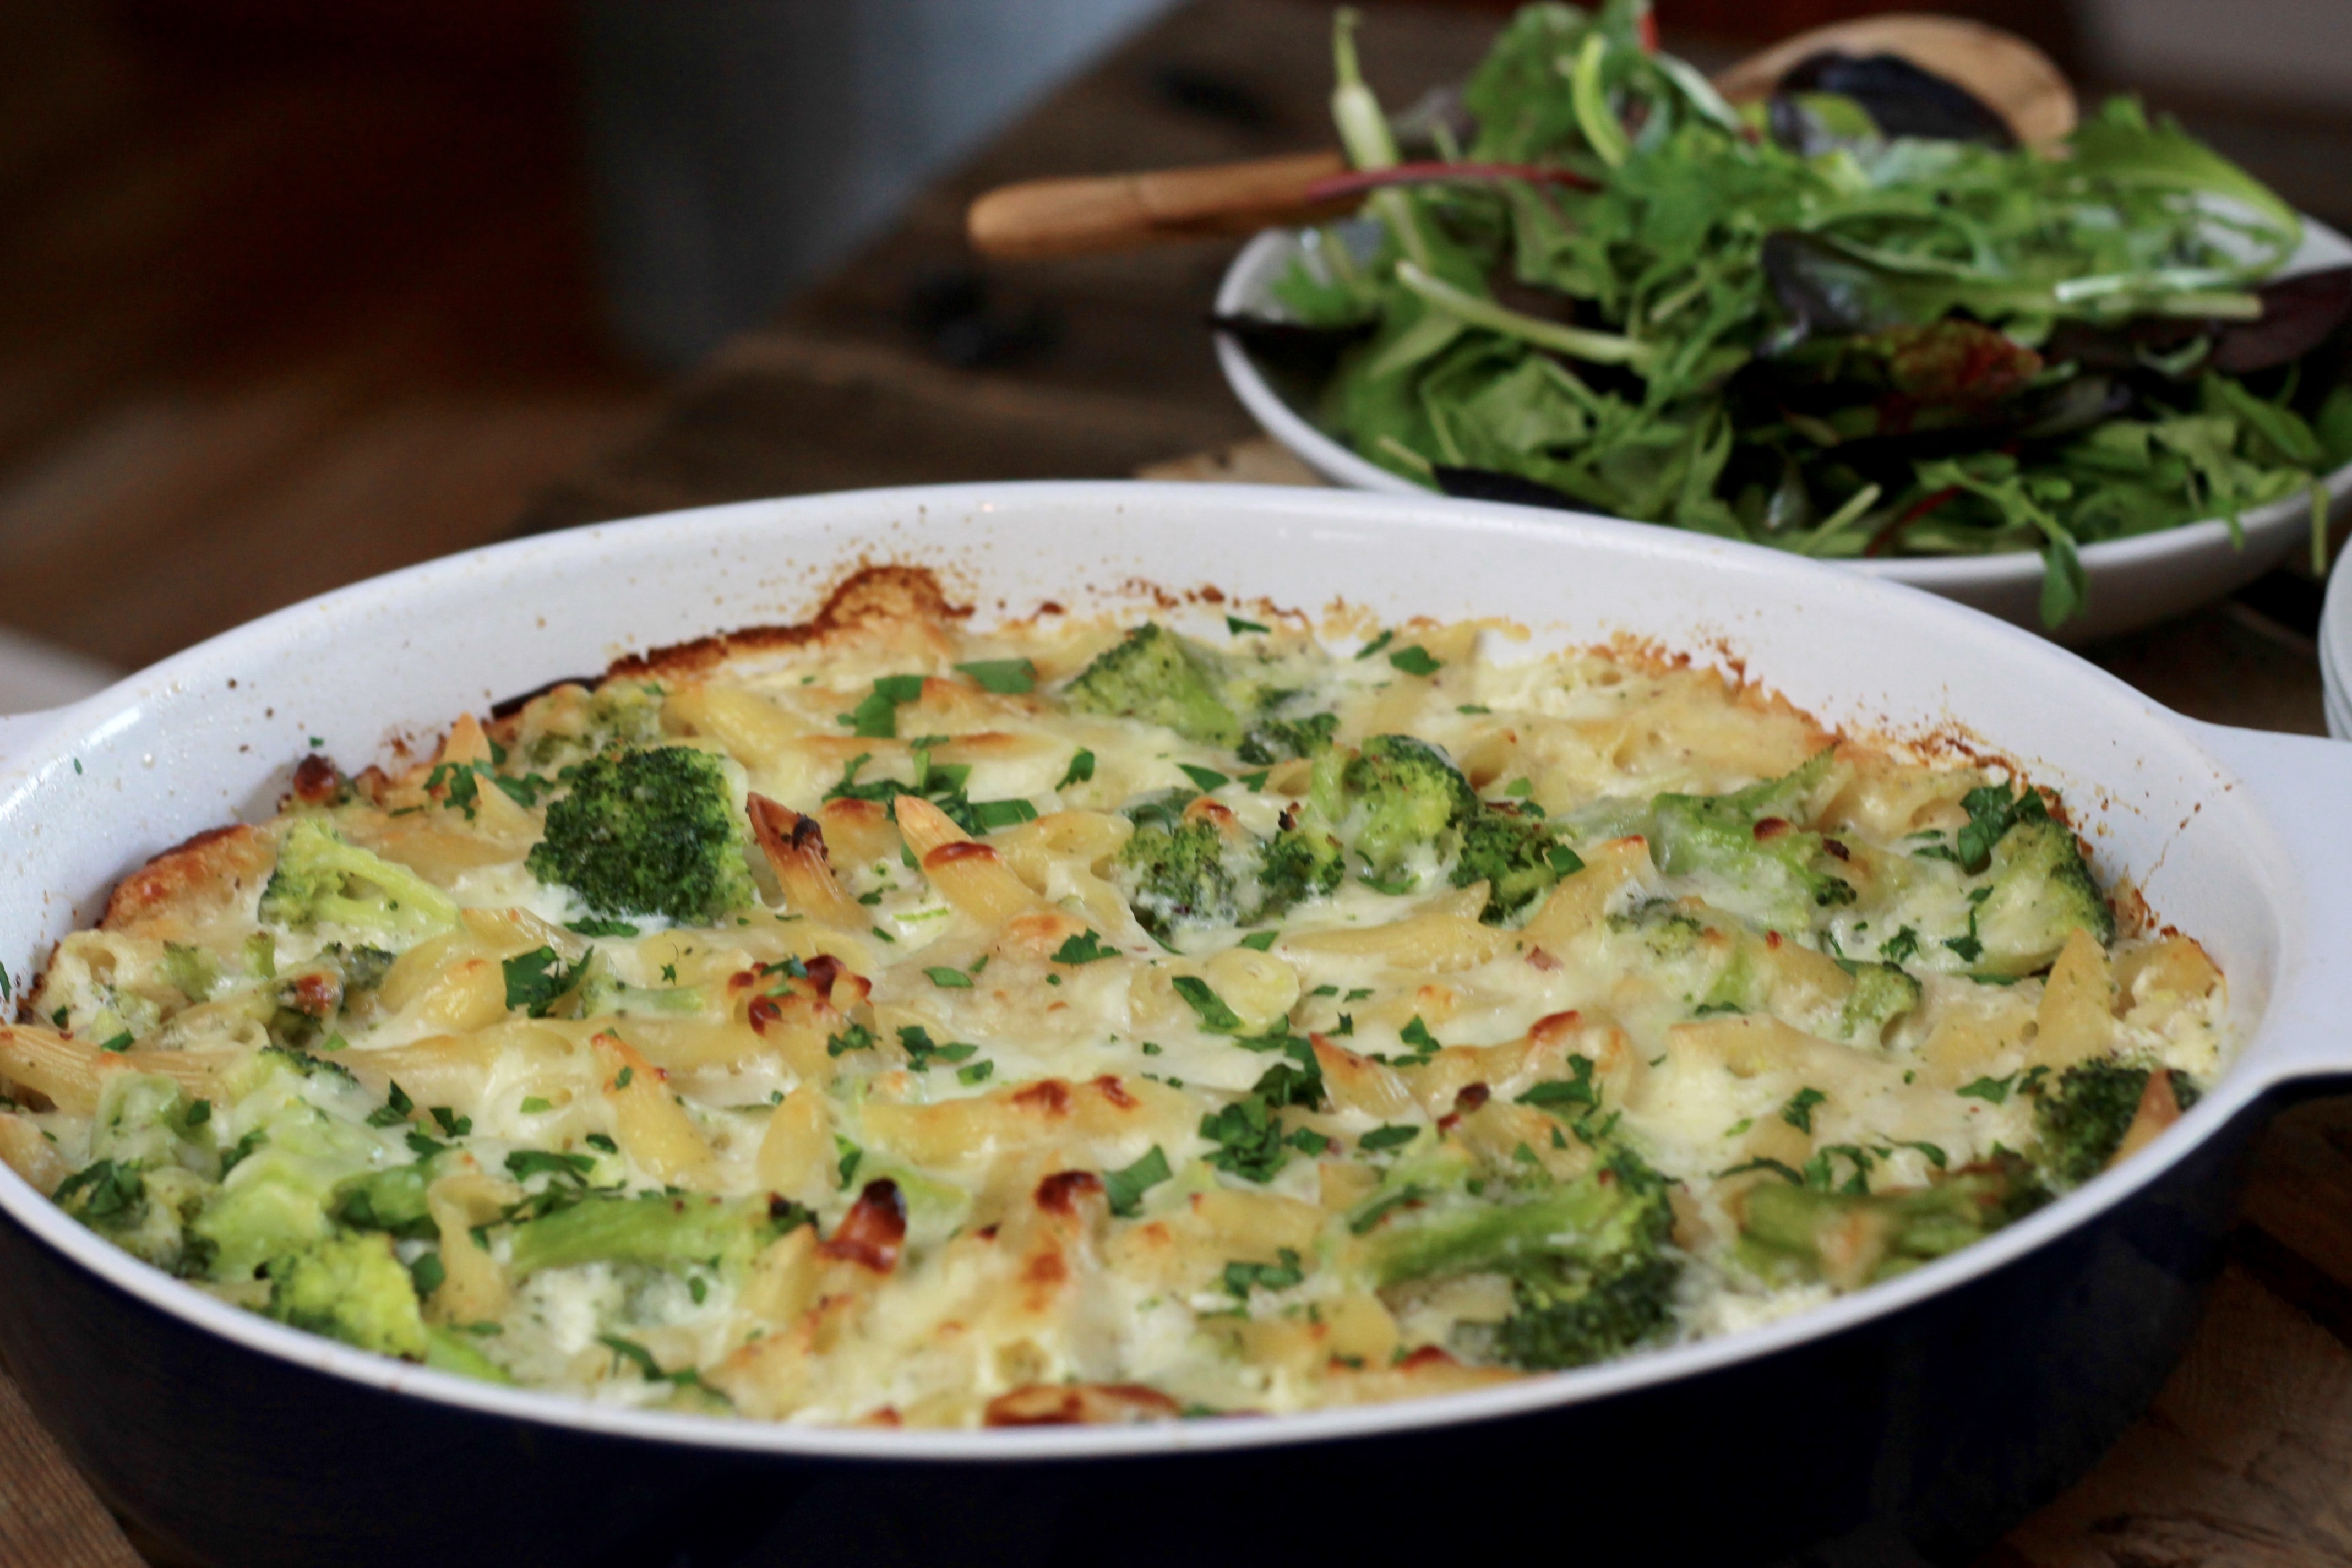 Oven baked crisp pasta, broccoli, and cheese in a dish to be served, with a side salad.